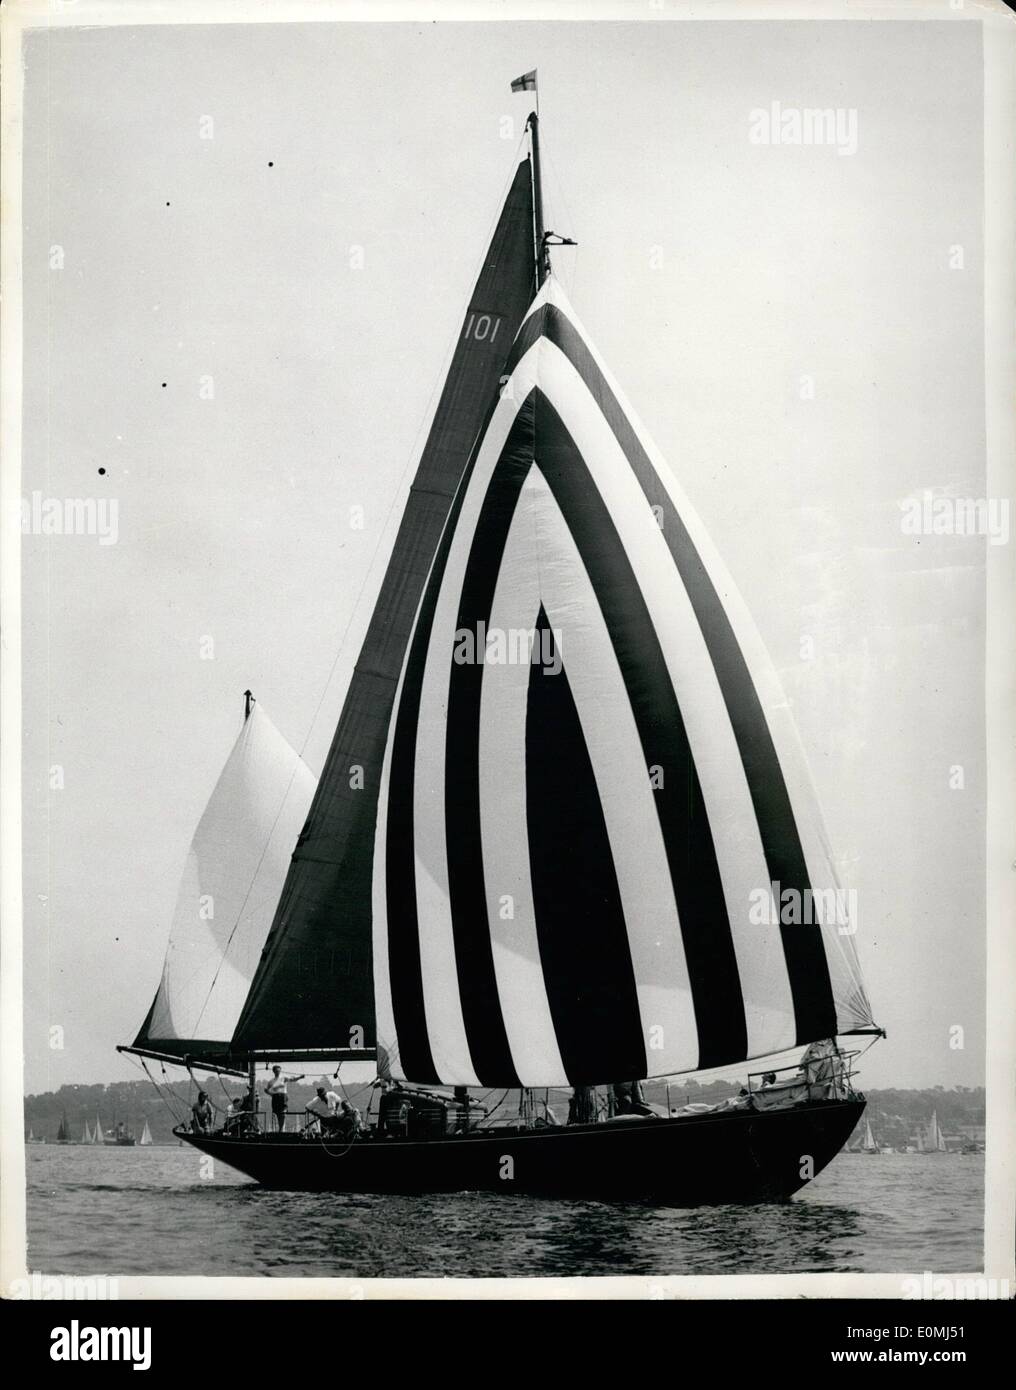 Aug. 08, 1955 - Stripes Are Chic - At Sea...''Bloodhound'' Shoes Her Paces: Most fashionable spot in Britain at the moment is Cowes at the opening of the famous Yachting week. The most fashionable craft to be seen there us this yacht ''Bloodhound'' owned by Mr. W. Wyatt - which is claimed to be easy winner of the 'fashion stakes' Stock Photo